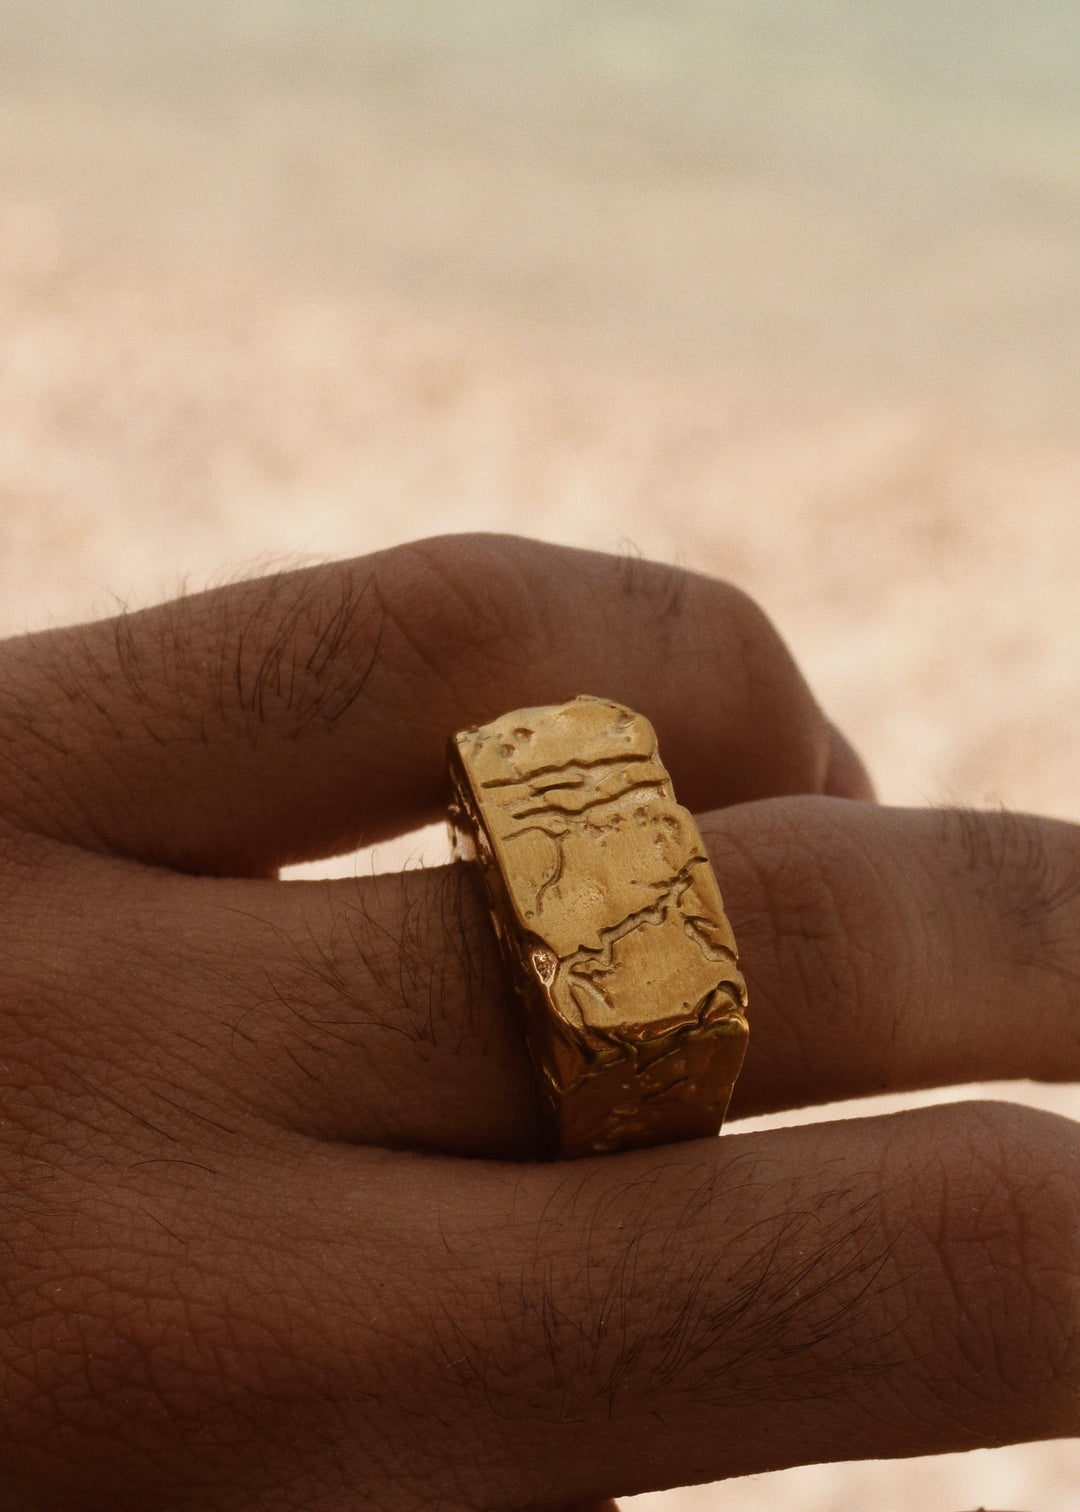 A person wearing a gold ring on a beach.